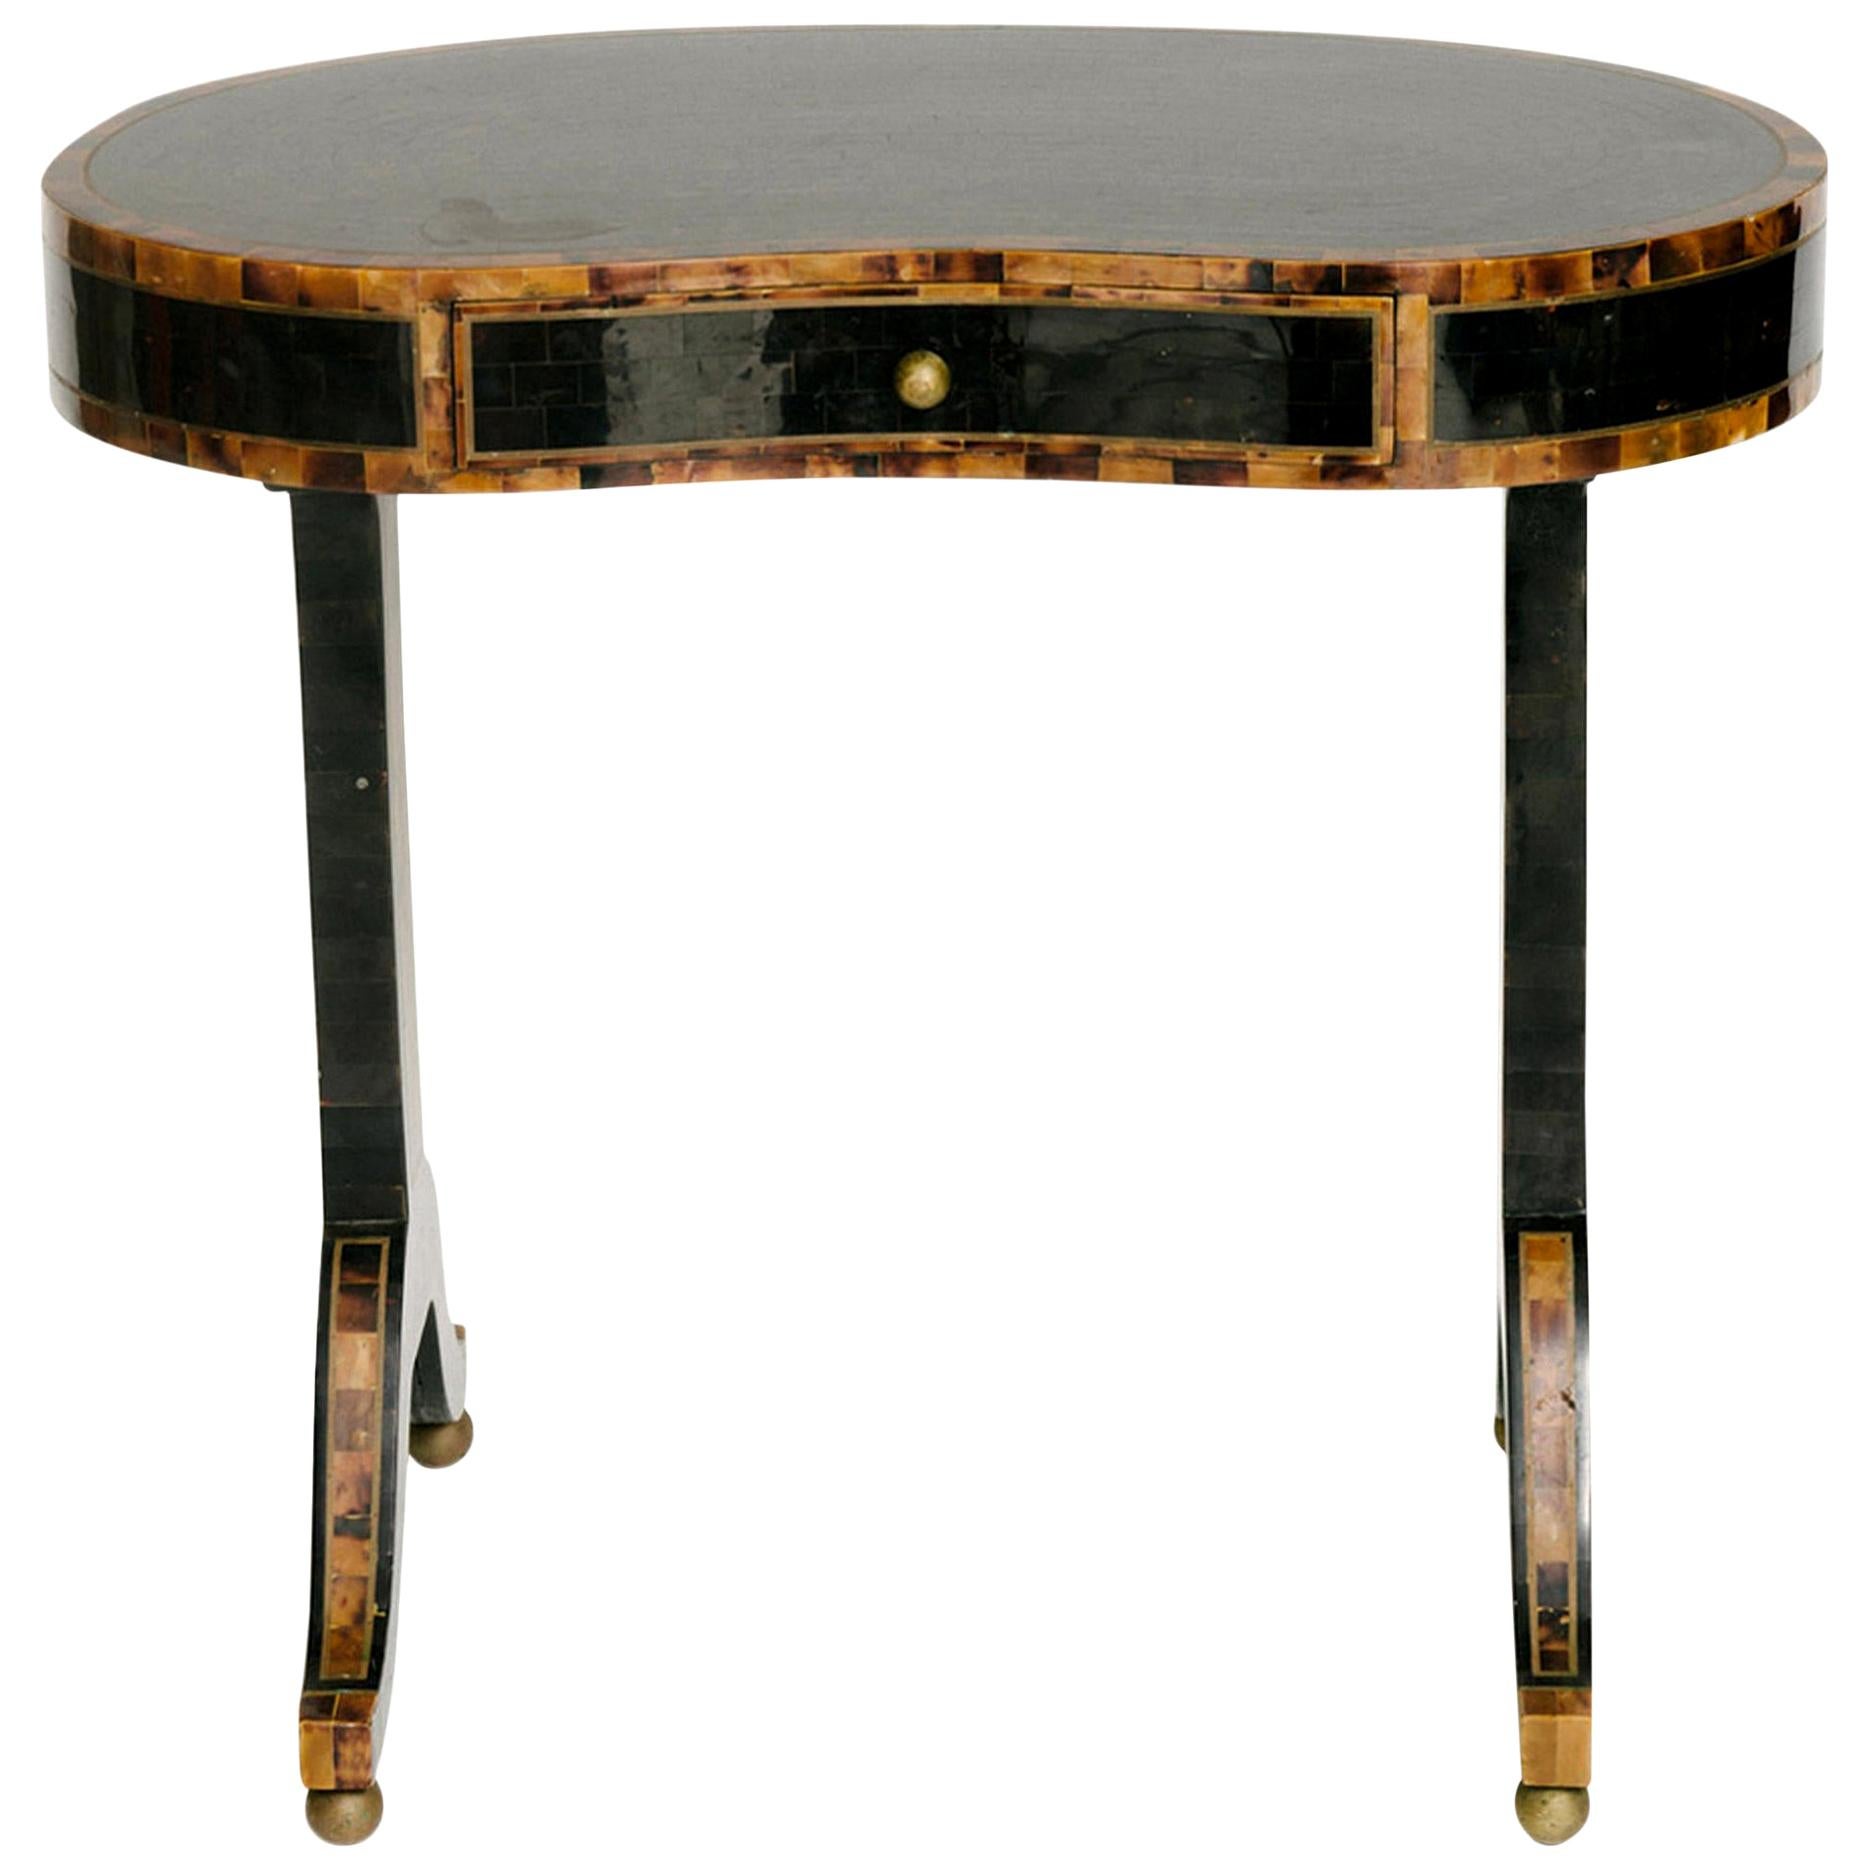 A wonderful Maitland-Smith kidney shaped occasional table with mix of ebony and tortoise colored horn veneers. This table features a single drawer, brass inlay detail and brass ball accents.